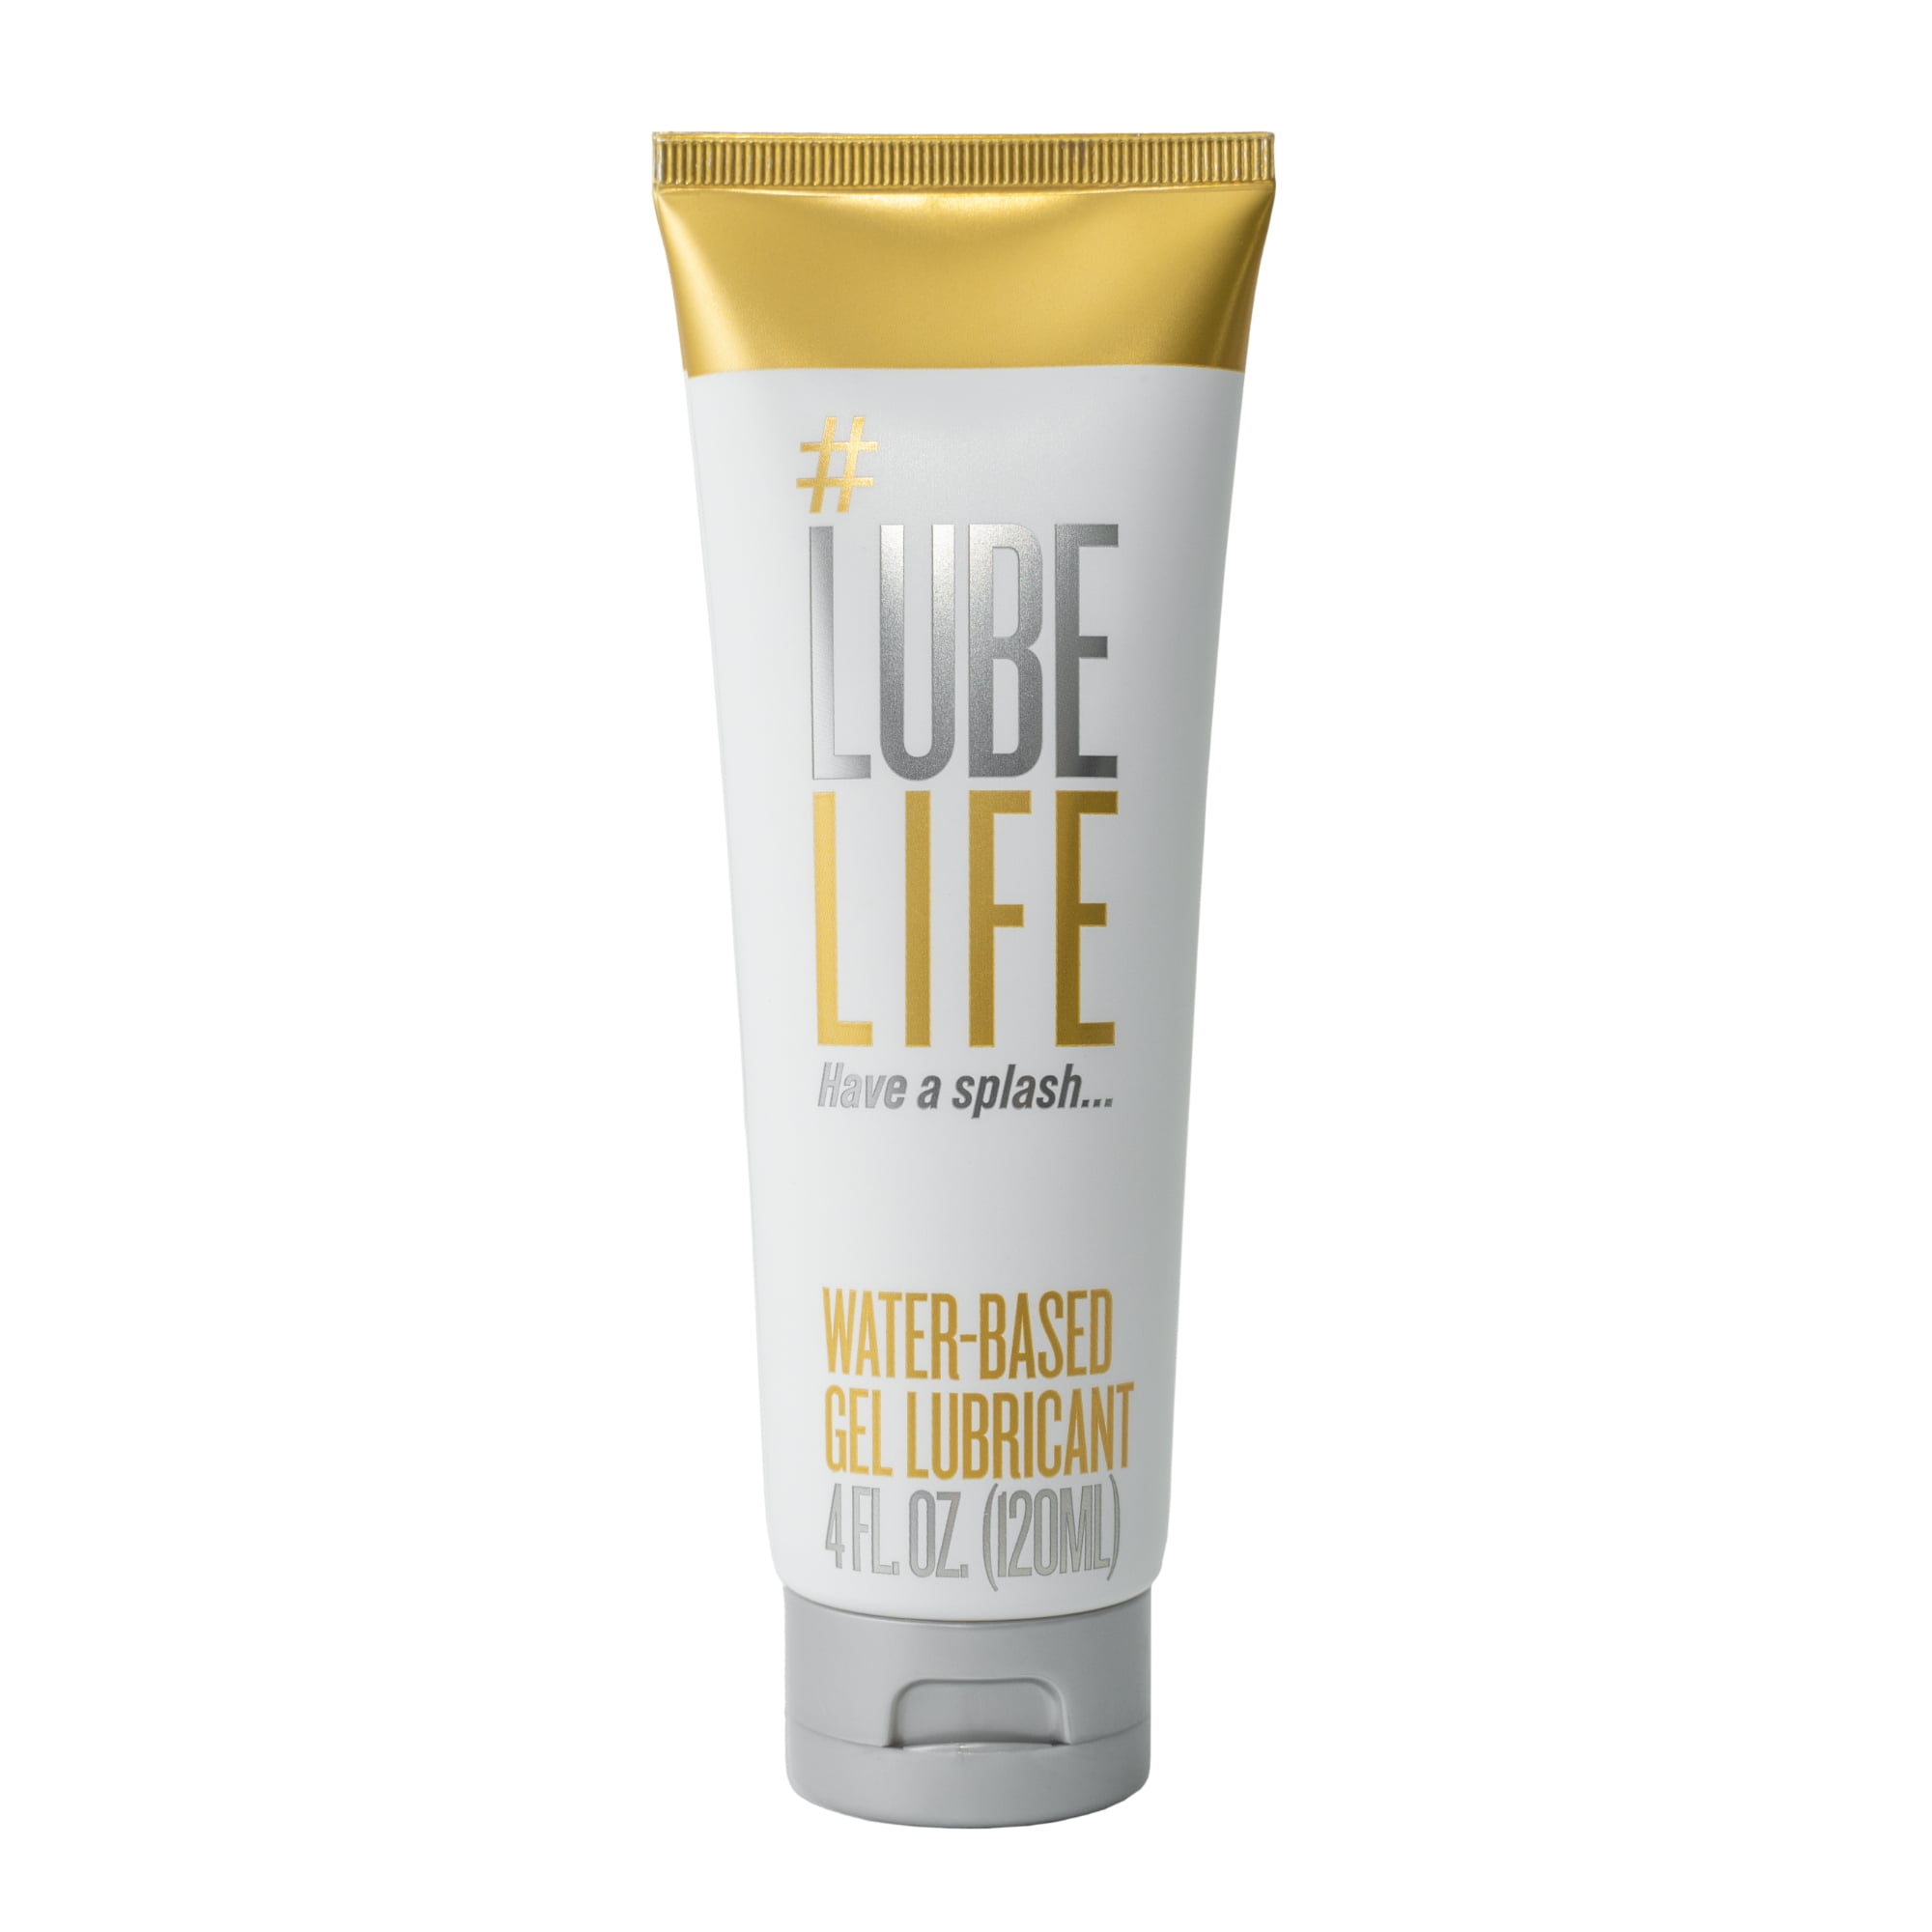 Lube Life Water Based Gel Lubricant for Men, Women and Couples, 4 fl oz 